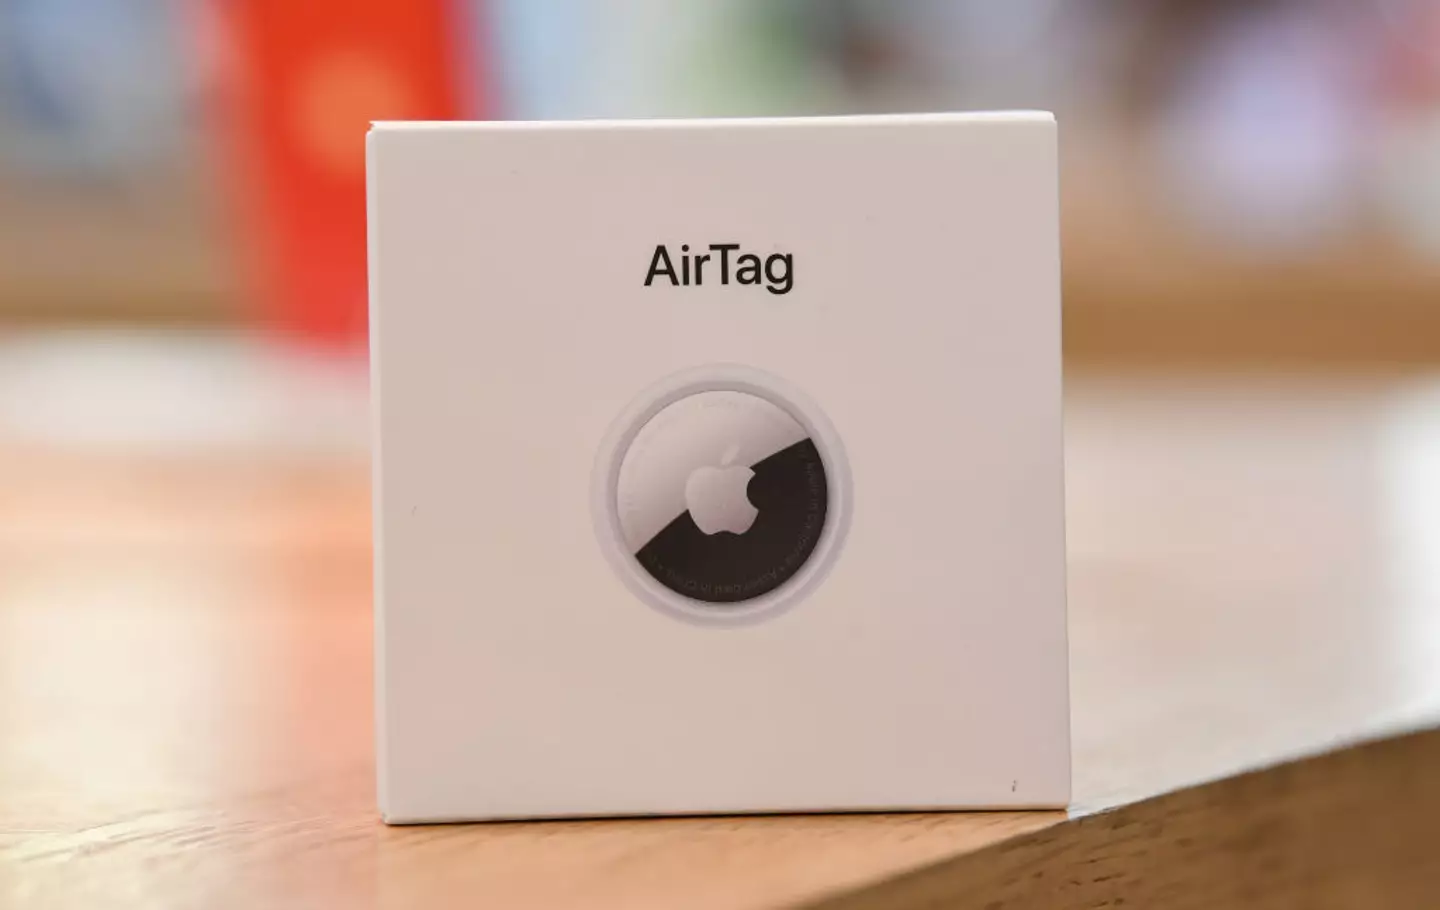 AirTags are only able to be tracked when they're within a certain Bluetooth distance of the iPhone they're connected to.